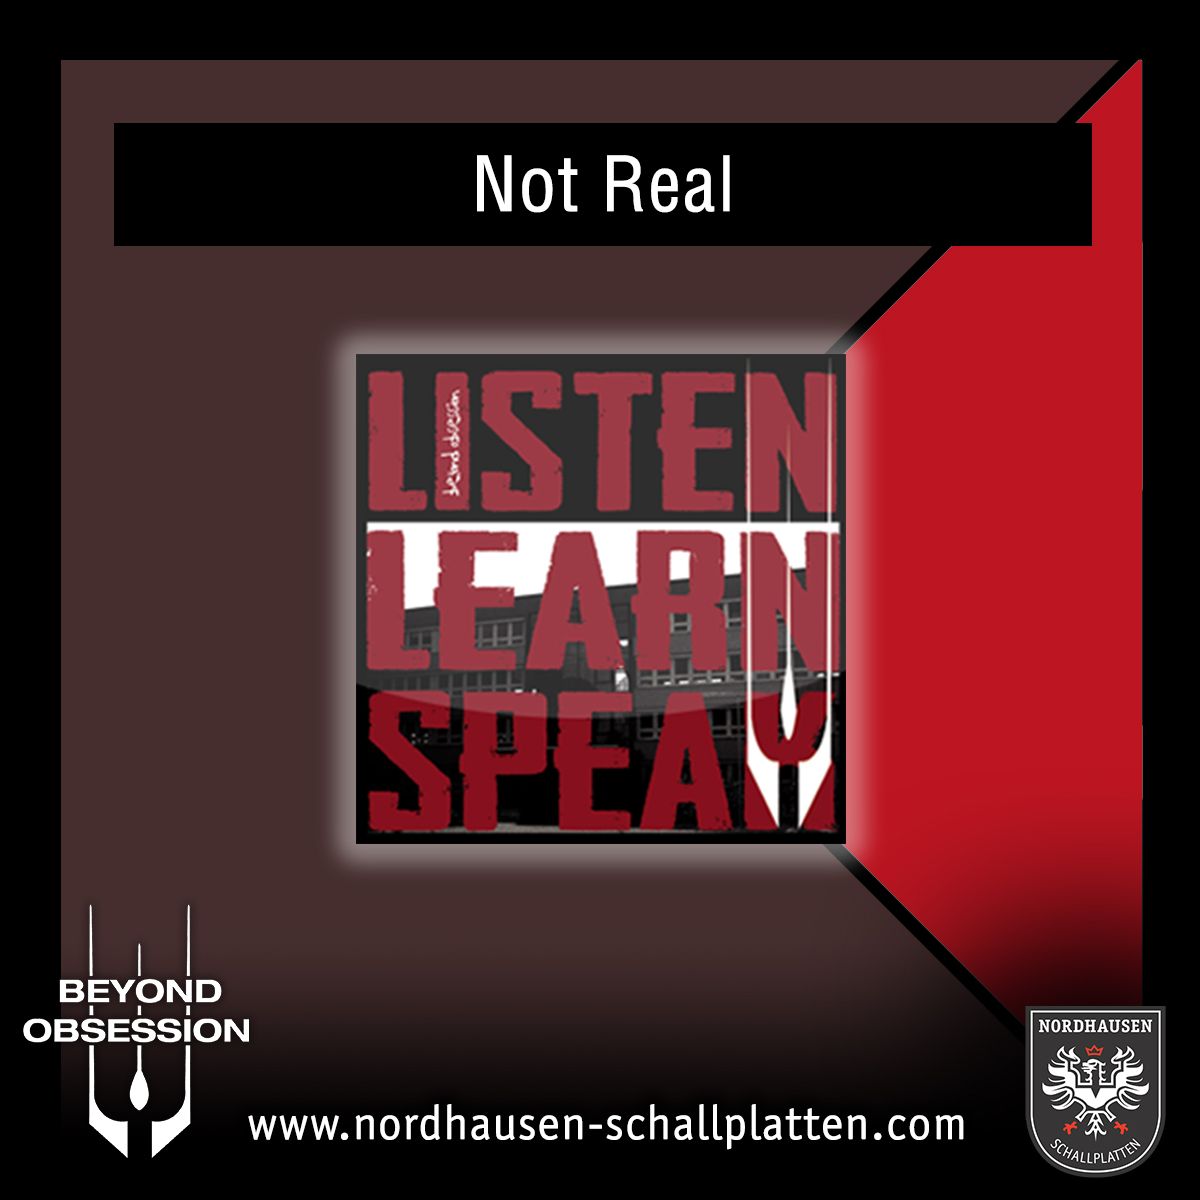 Listen to Not Real by Beyond Obsession on #Youtube and just enjoy it: buff.ly/3Bh41qf #NordhausenSchallplatten #beyondobsession #listenlearnandspeak #momentsoftruth #pureandnaked #spreadthemusic